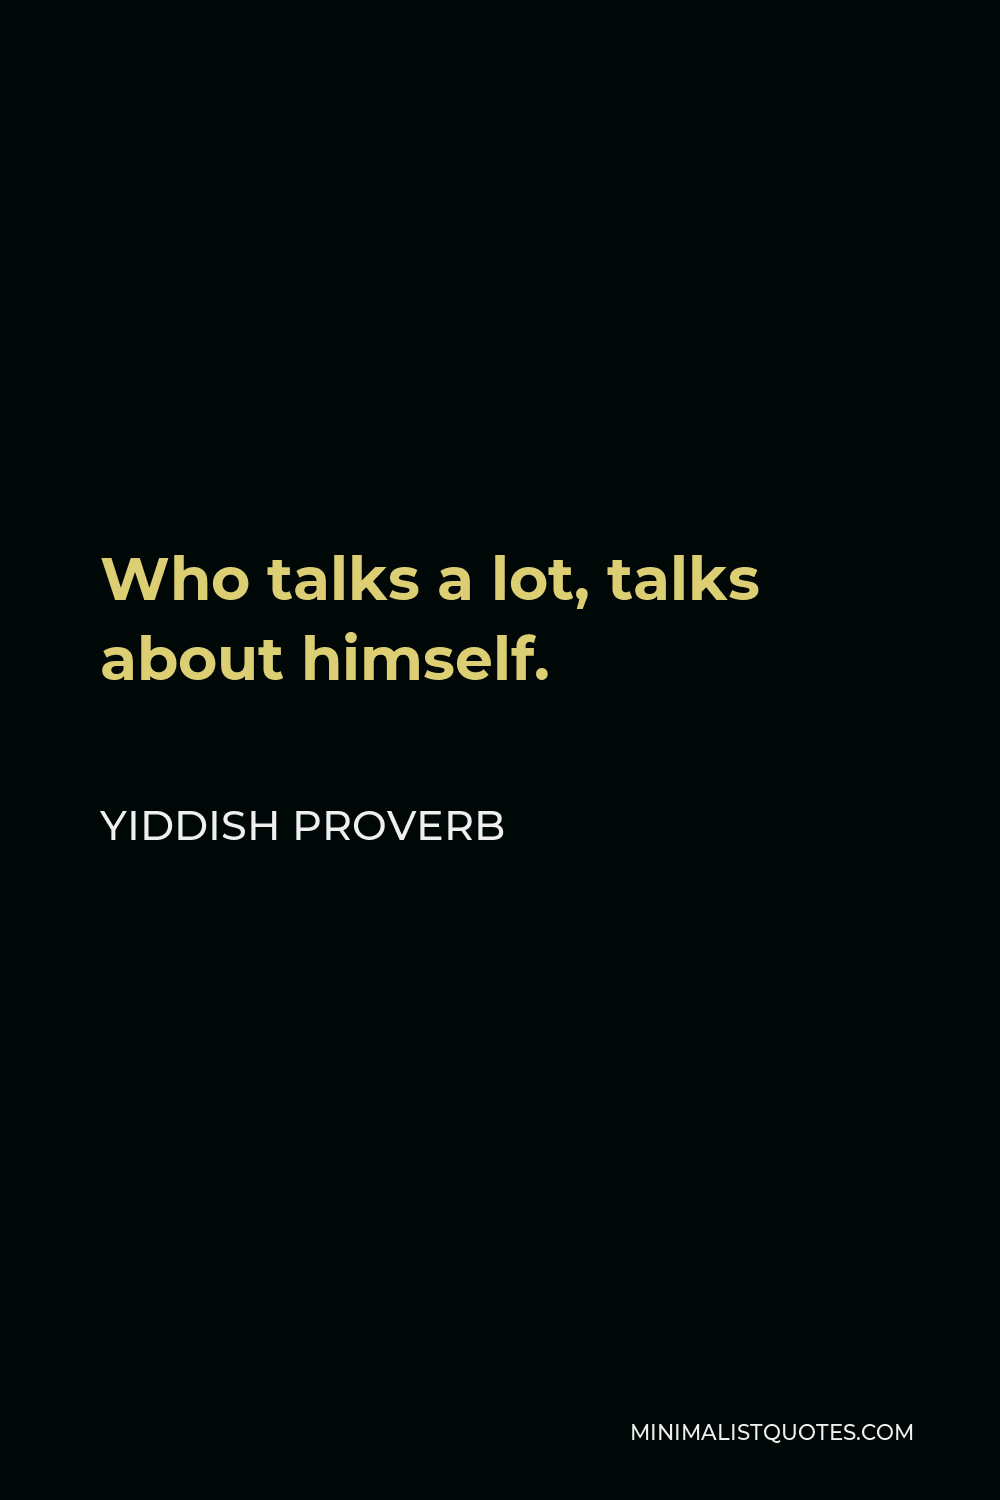 Yiddish Proverb Quote - Who talks a lot, talks about himself.